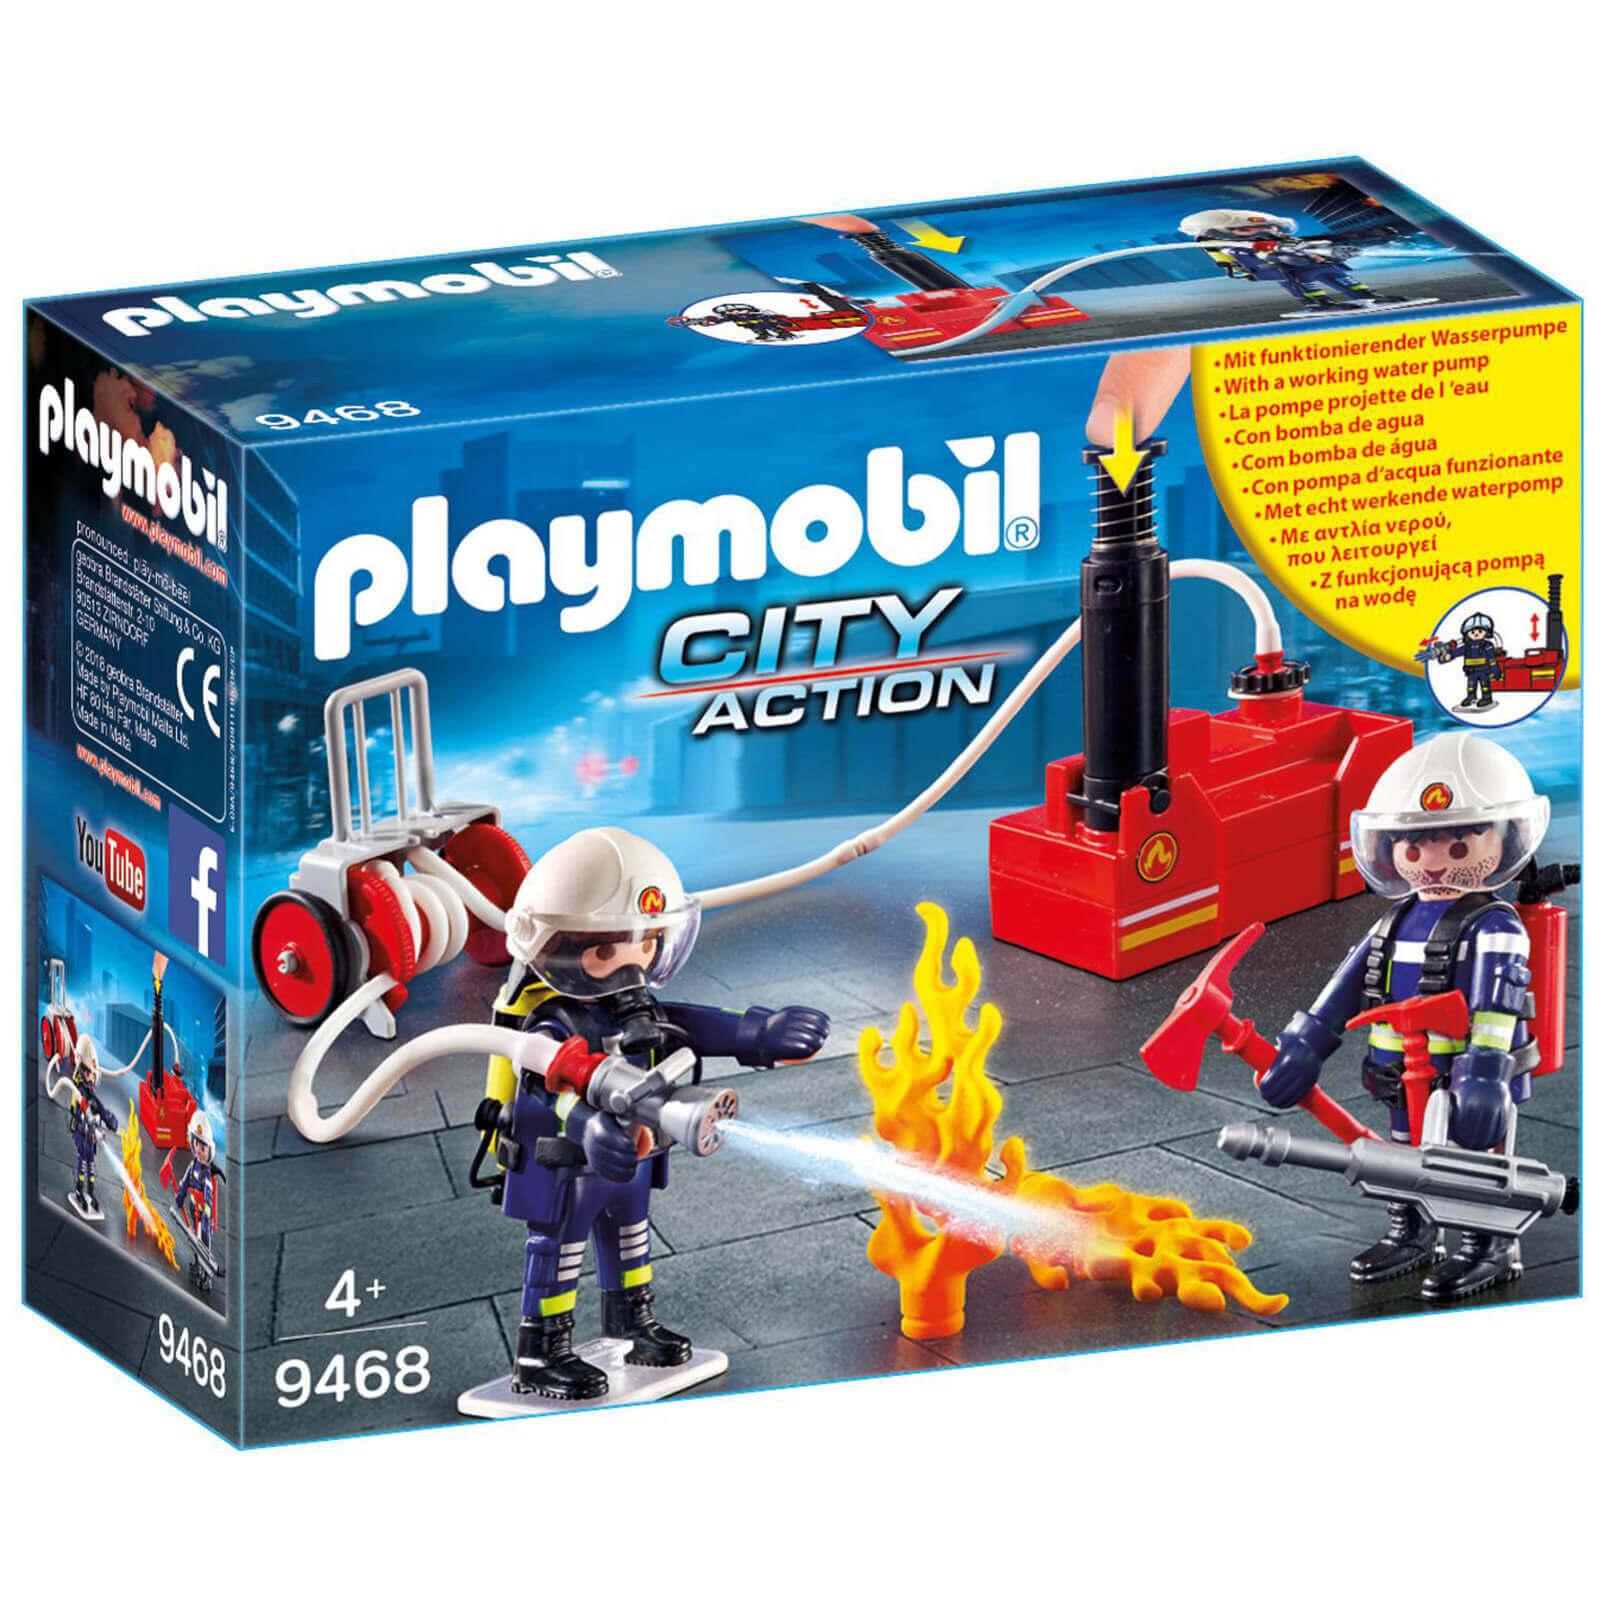 Playmobil City Action Firefighters with Water Pump (9468)